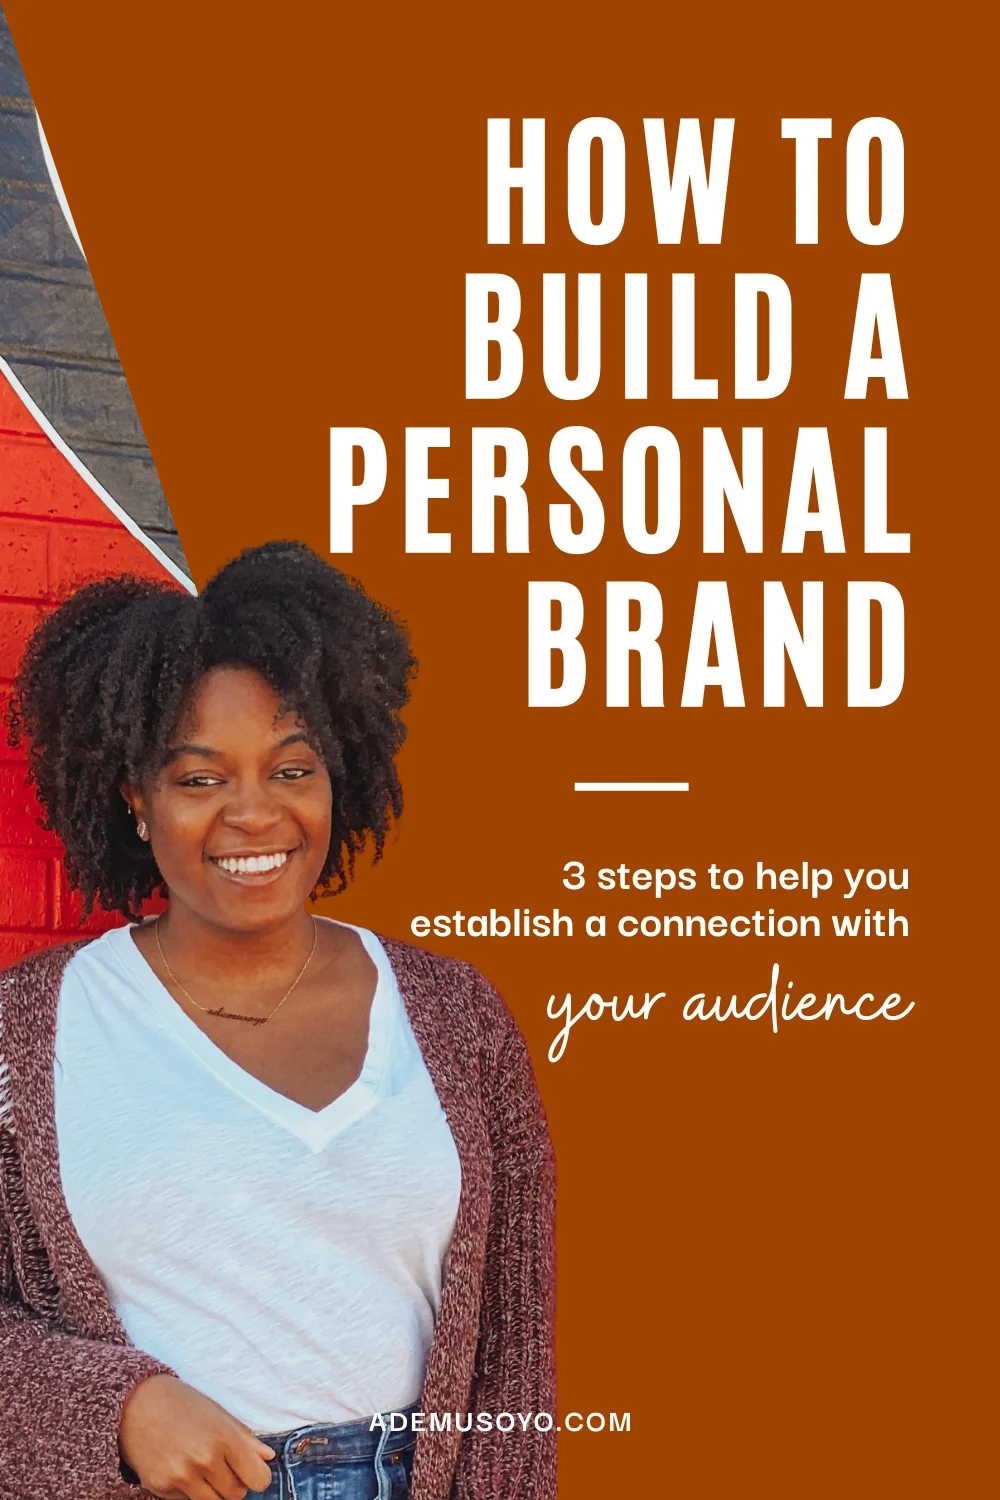 The Ultimate Guide To Building A Personal Brand, build a personal brand, personal branding, personal brand strategy